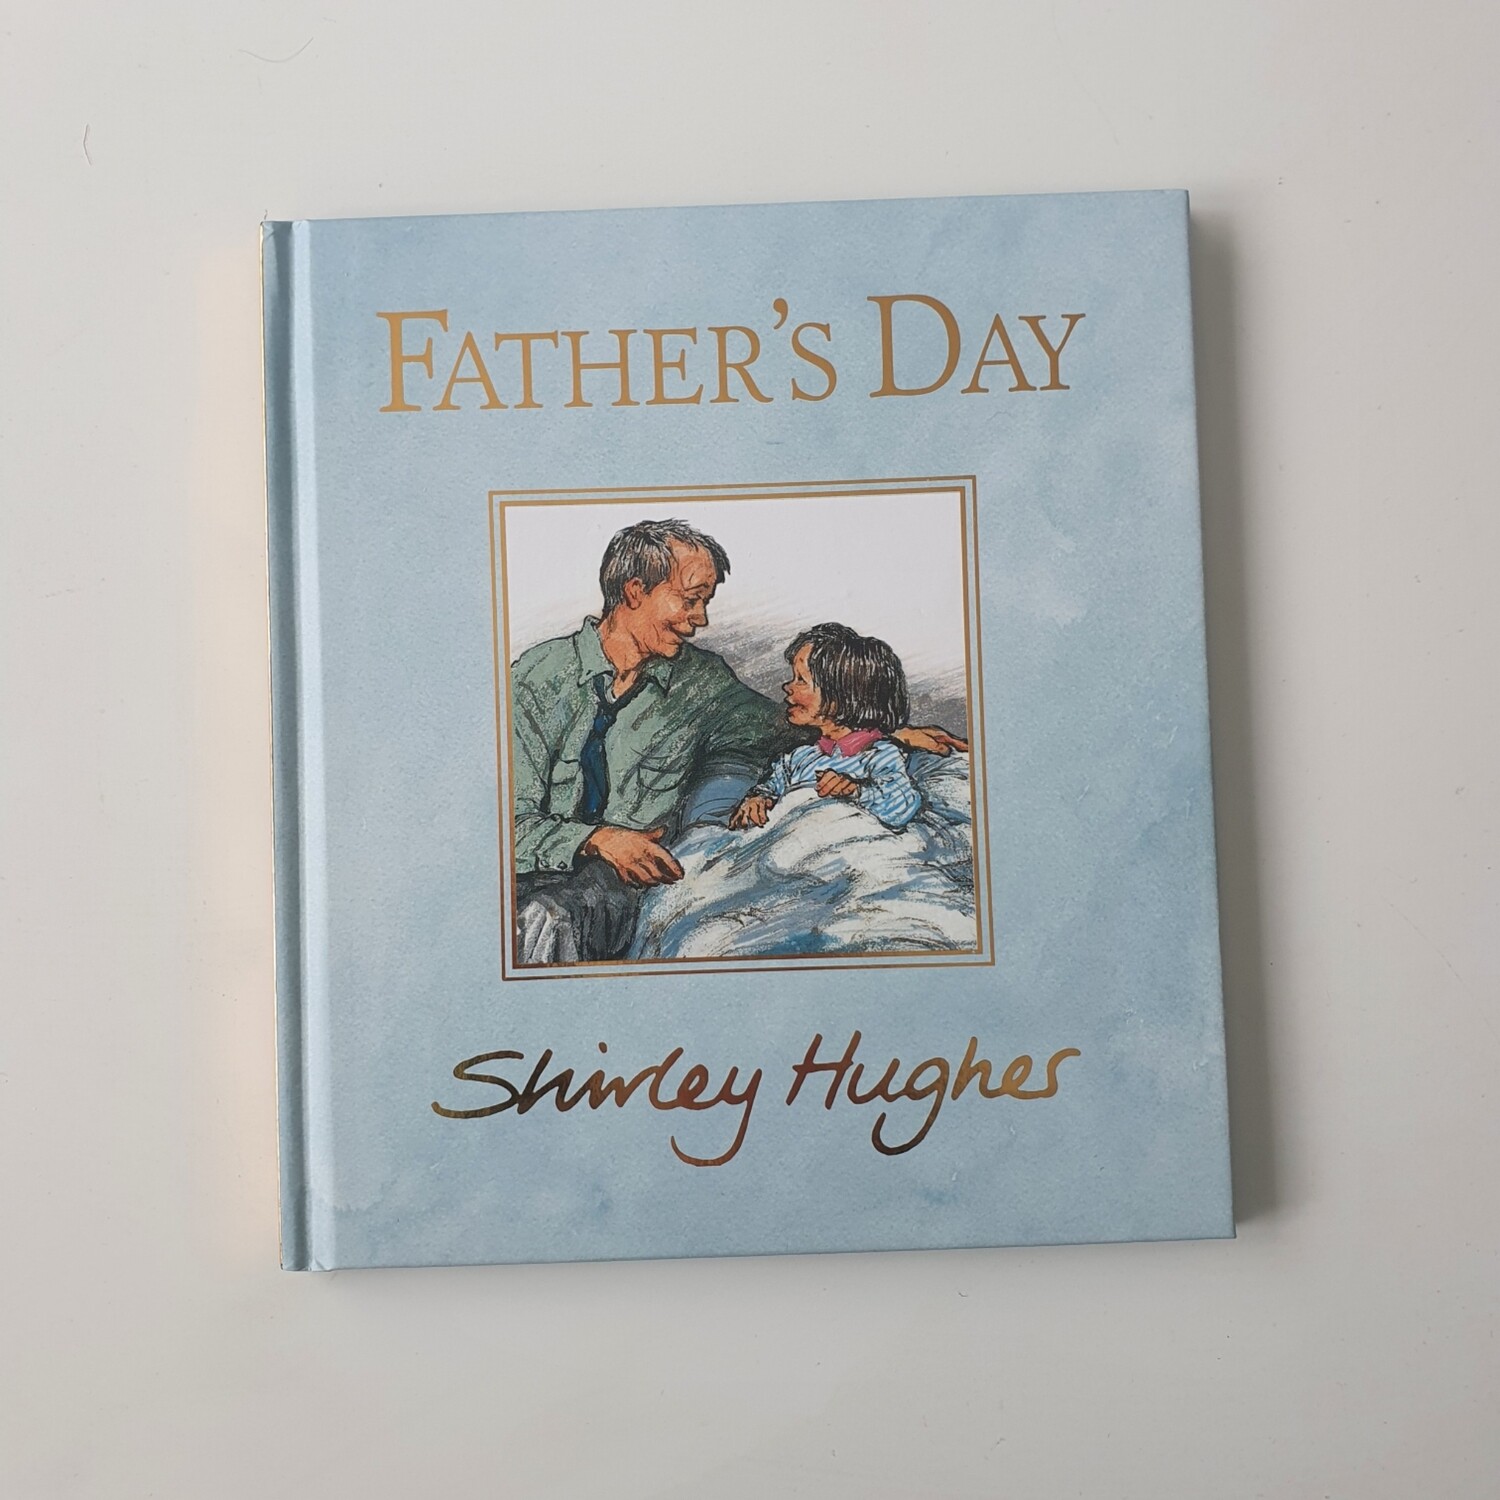 Father's Day by Shirley Hughes